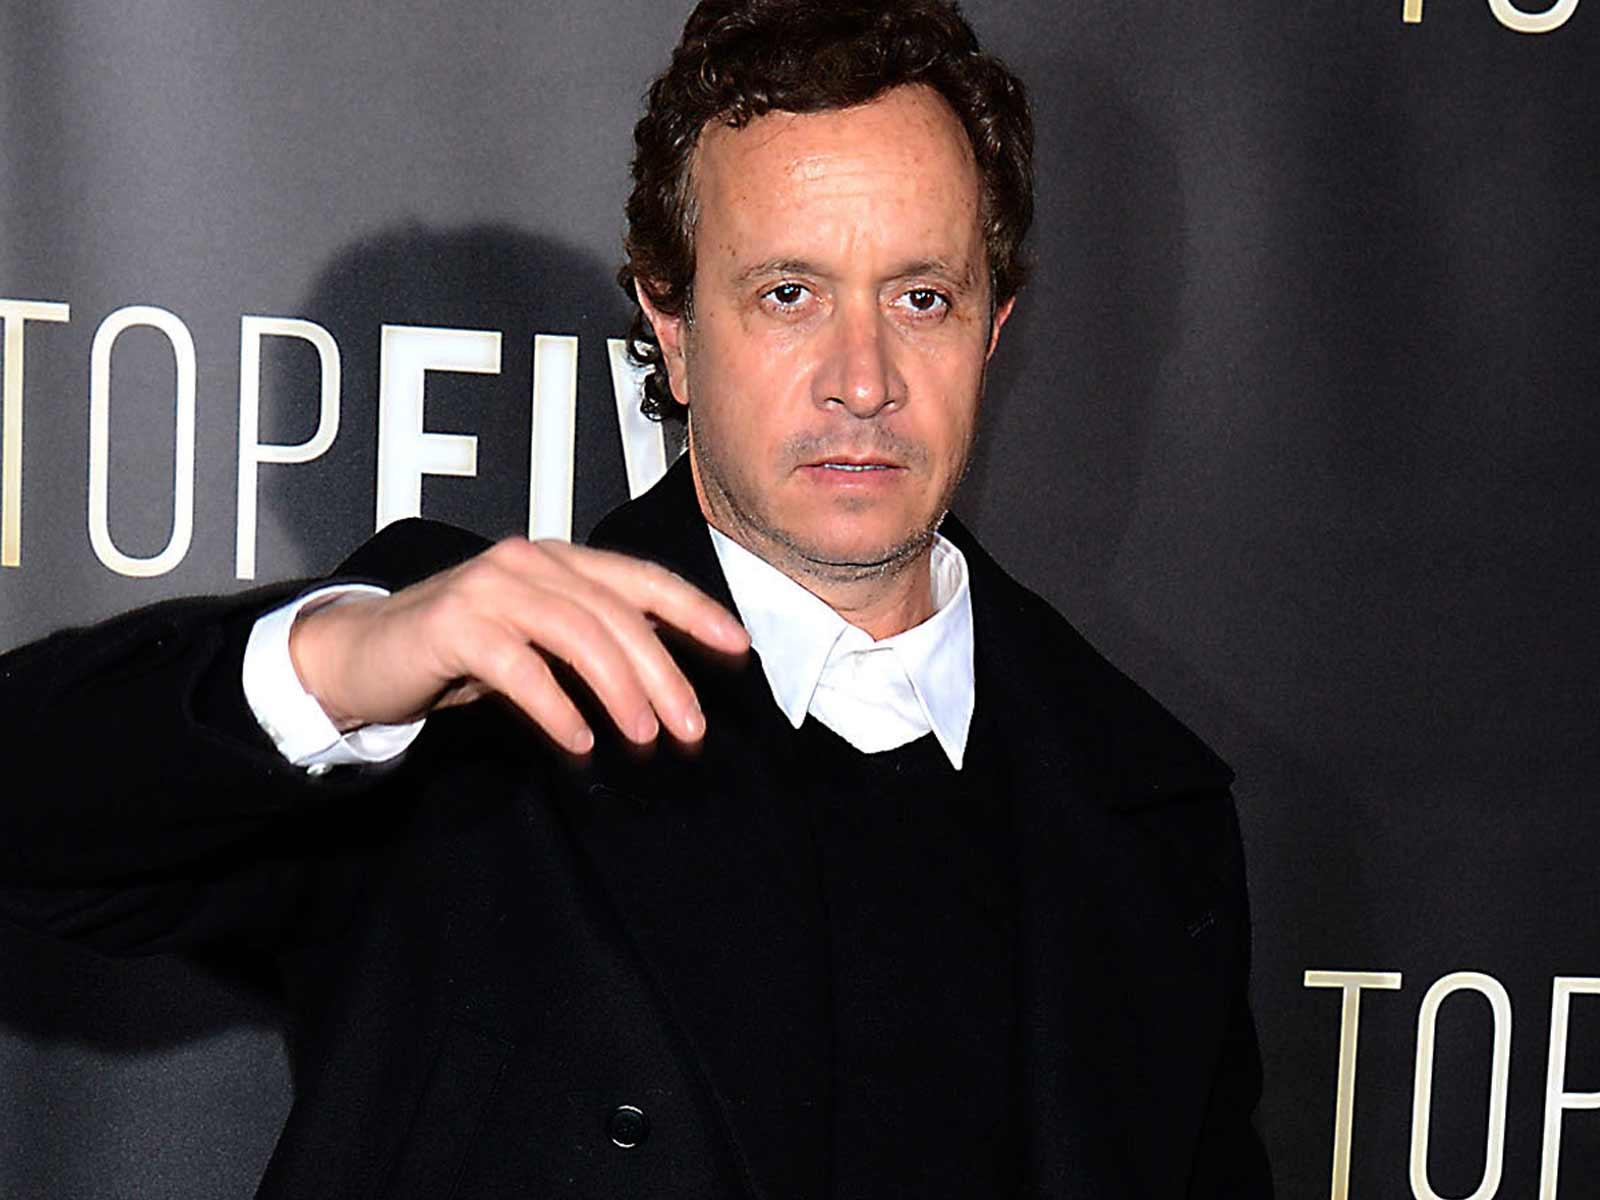 Pauly Shore Named Manager of The Comedy Store in Mom Mitzi’s Will